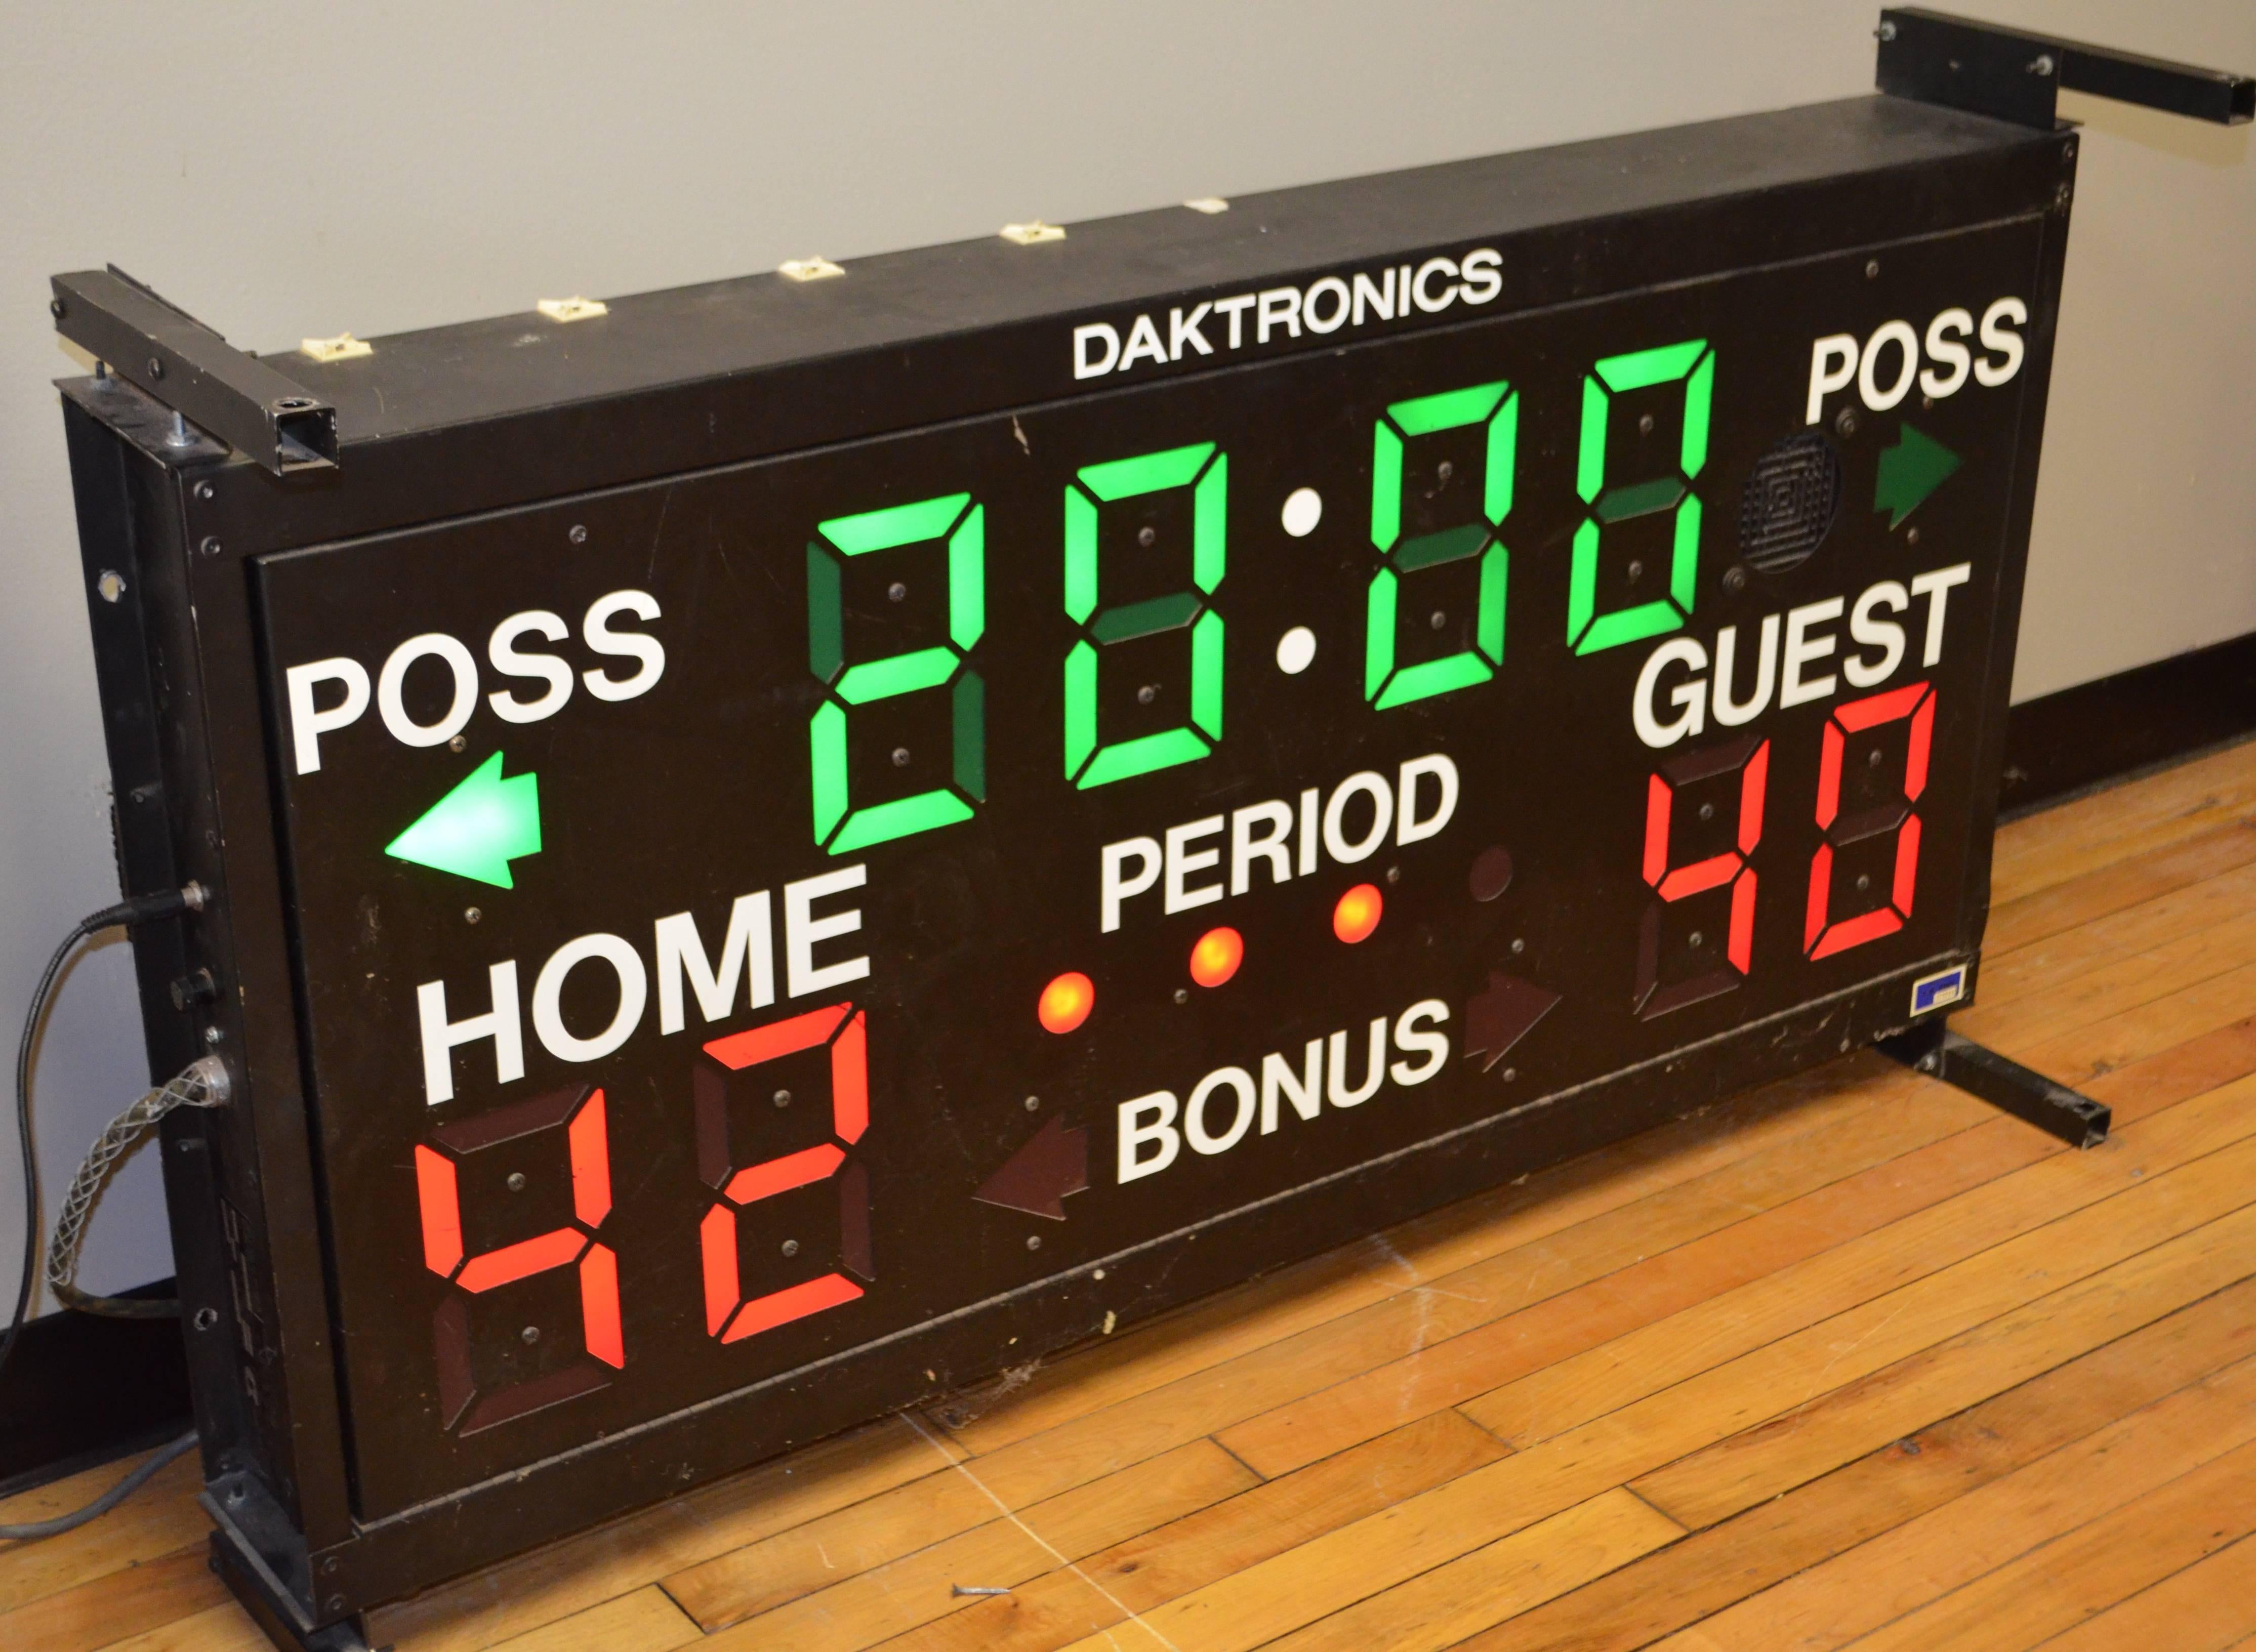 Basketball scoreboard from high school gym is neat, clean, fully operational and lightweight with all wiring included as well as control panel. Just in time for March Madness. Scoring numbers are much more vibrant red than the camera could depict as